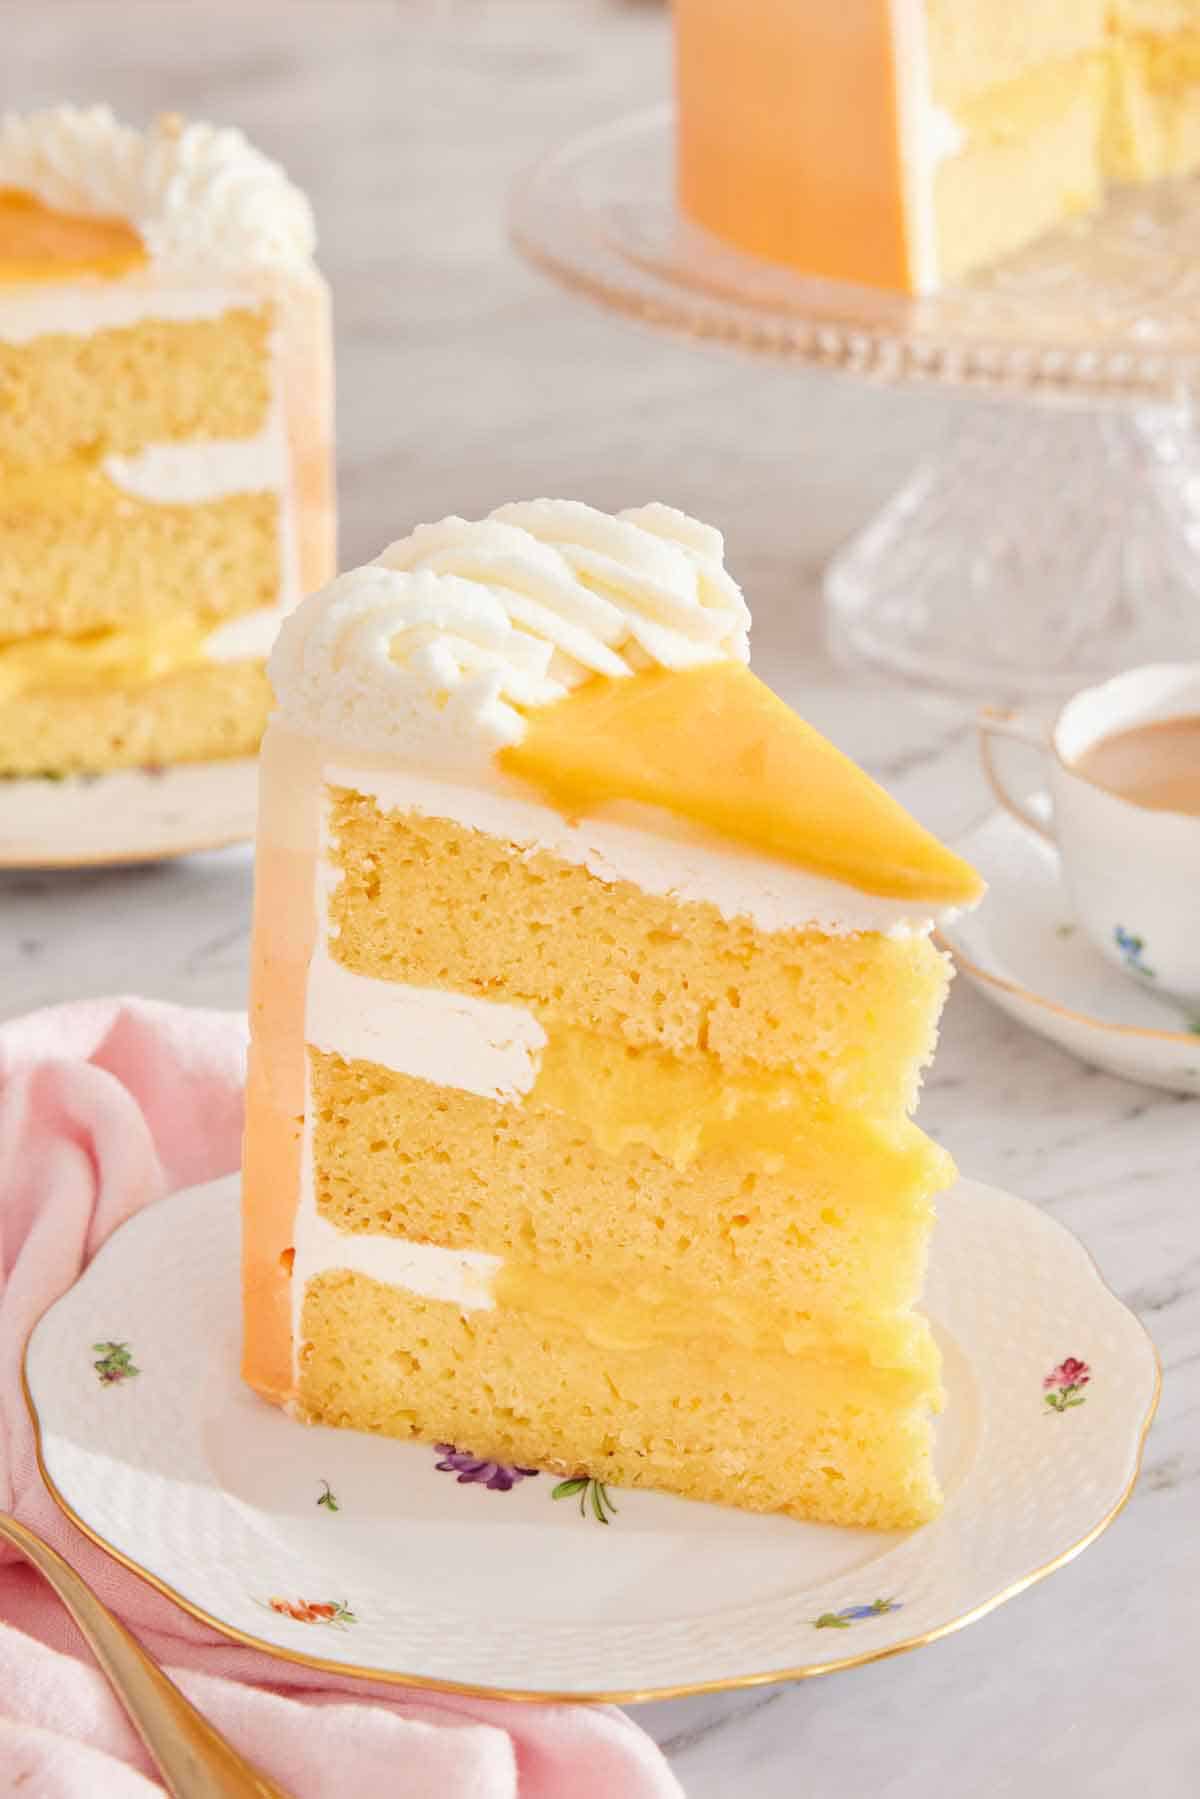 A slice of orange creamsicle cake on a plate, showing the three cake layers with frosting and orange curd in between.